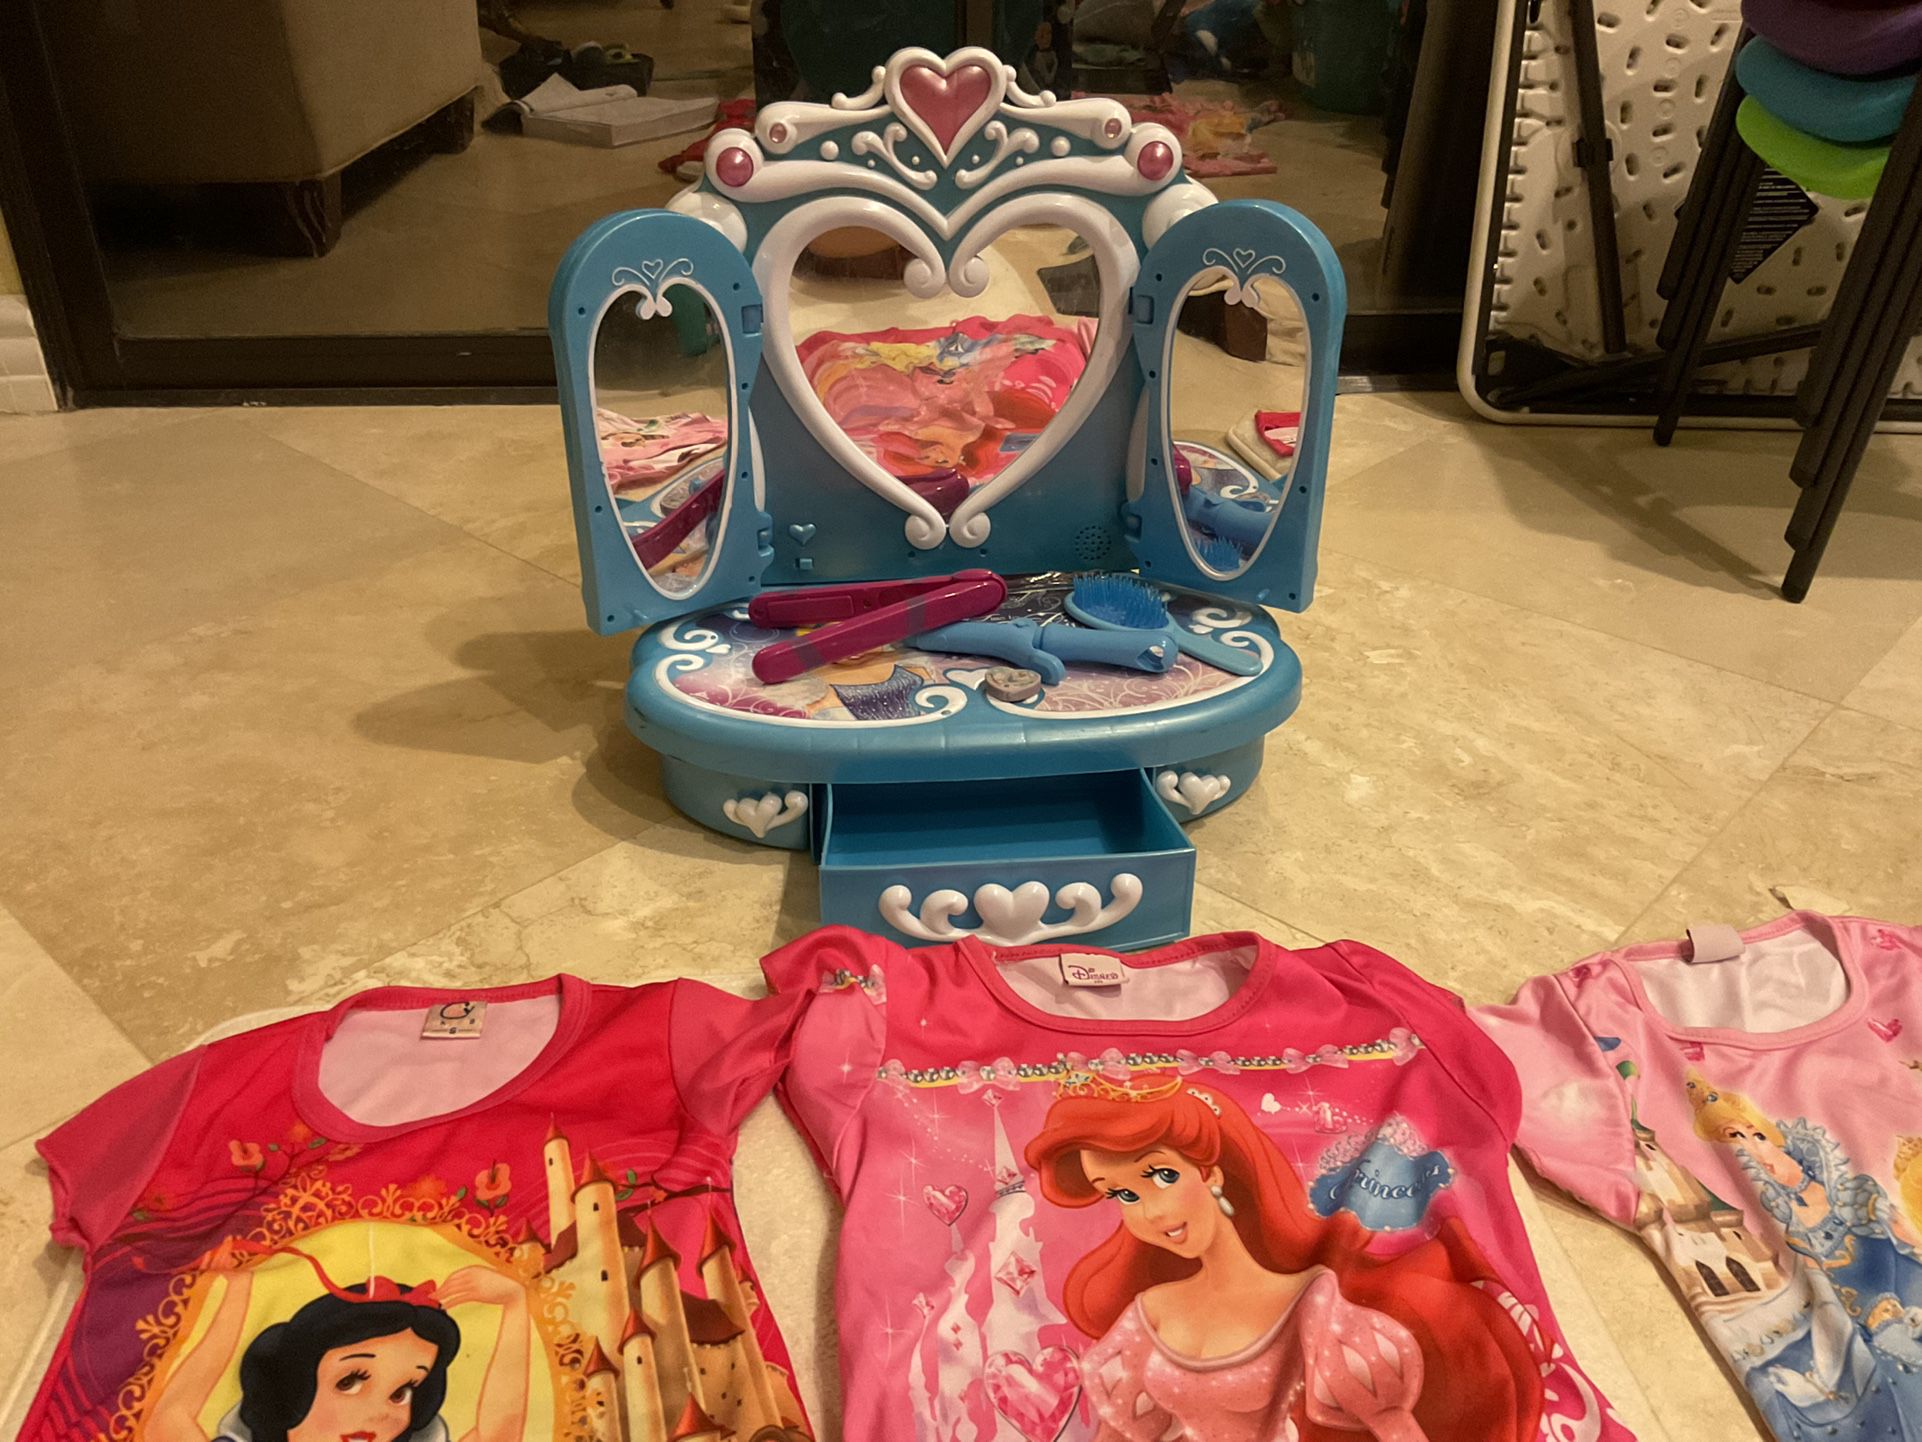 Cinderella Mirror Make Up Station With Disney Princesses Night Gown.